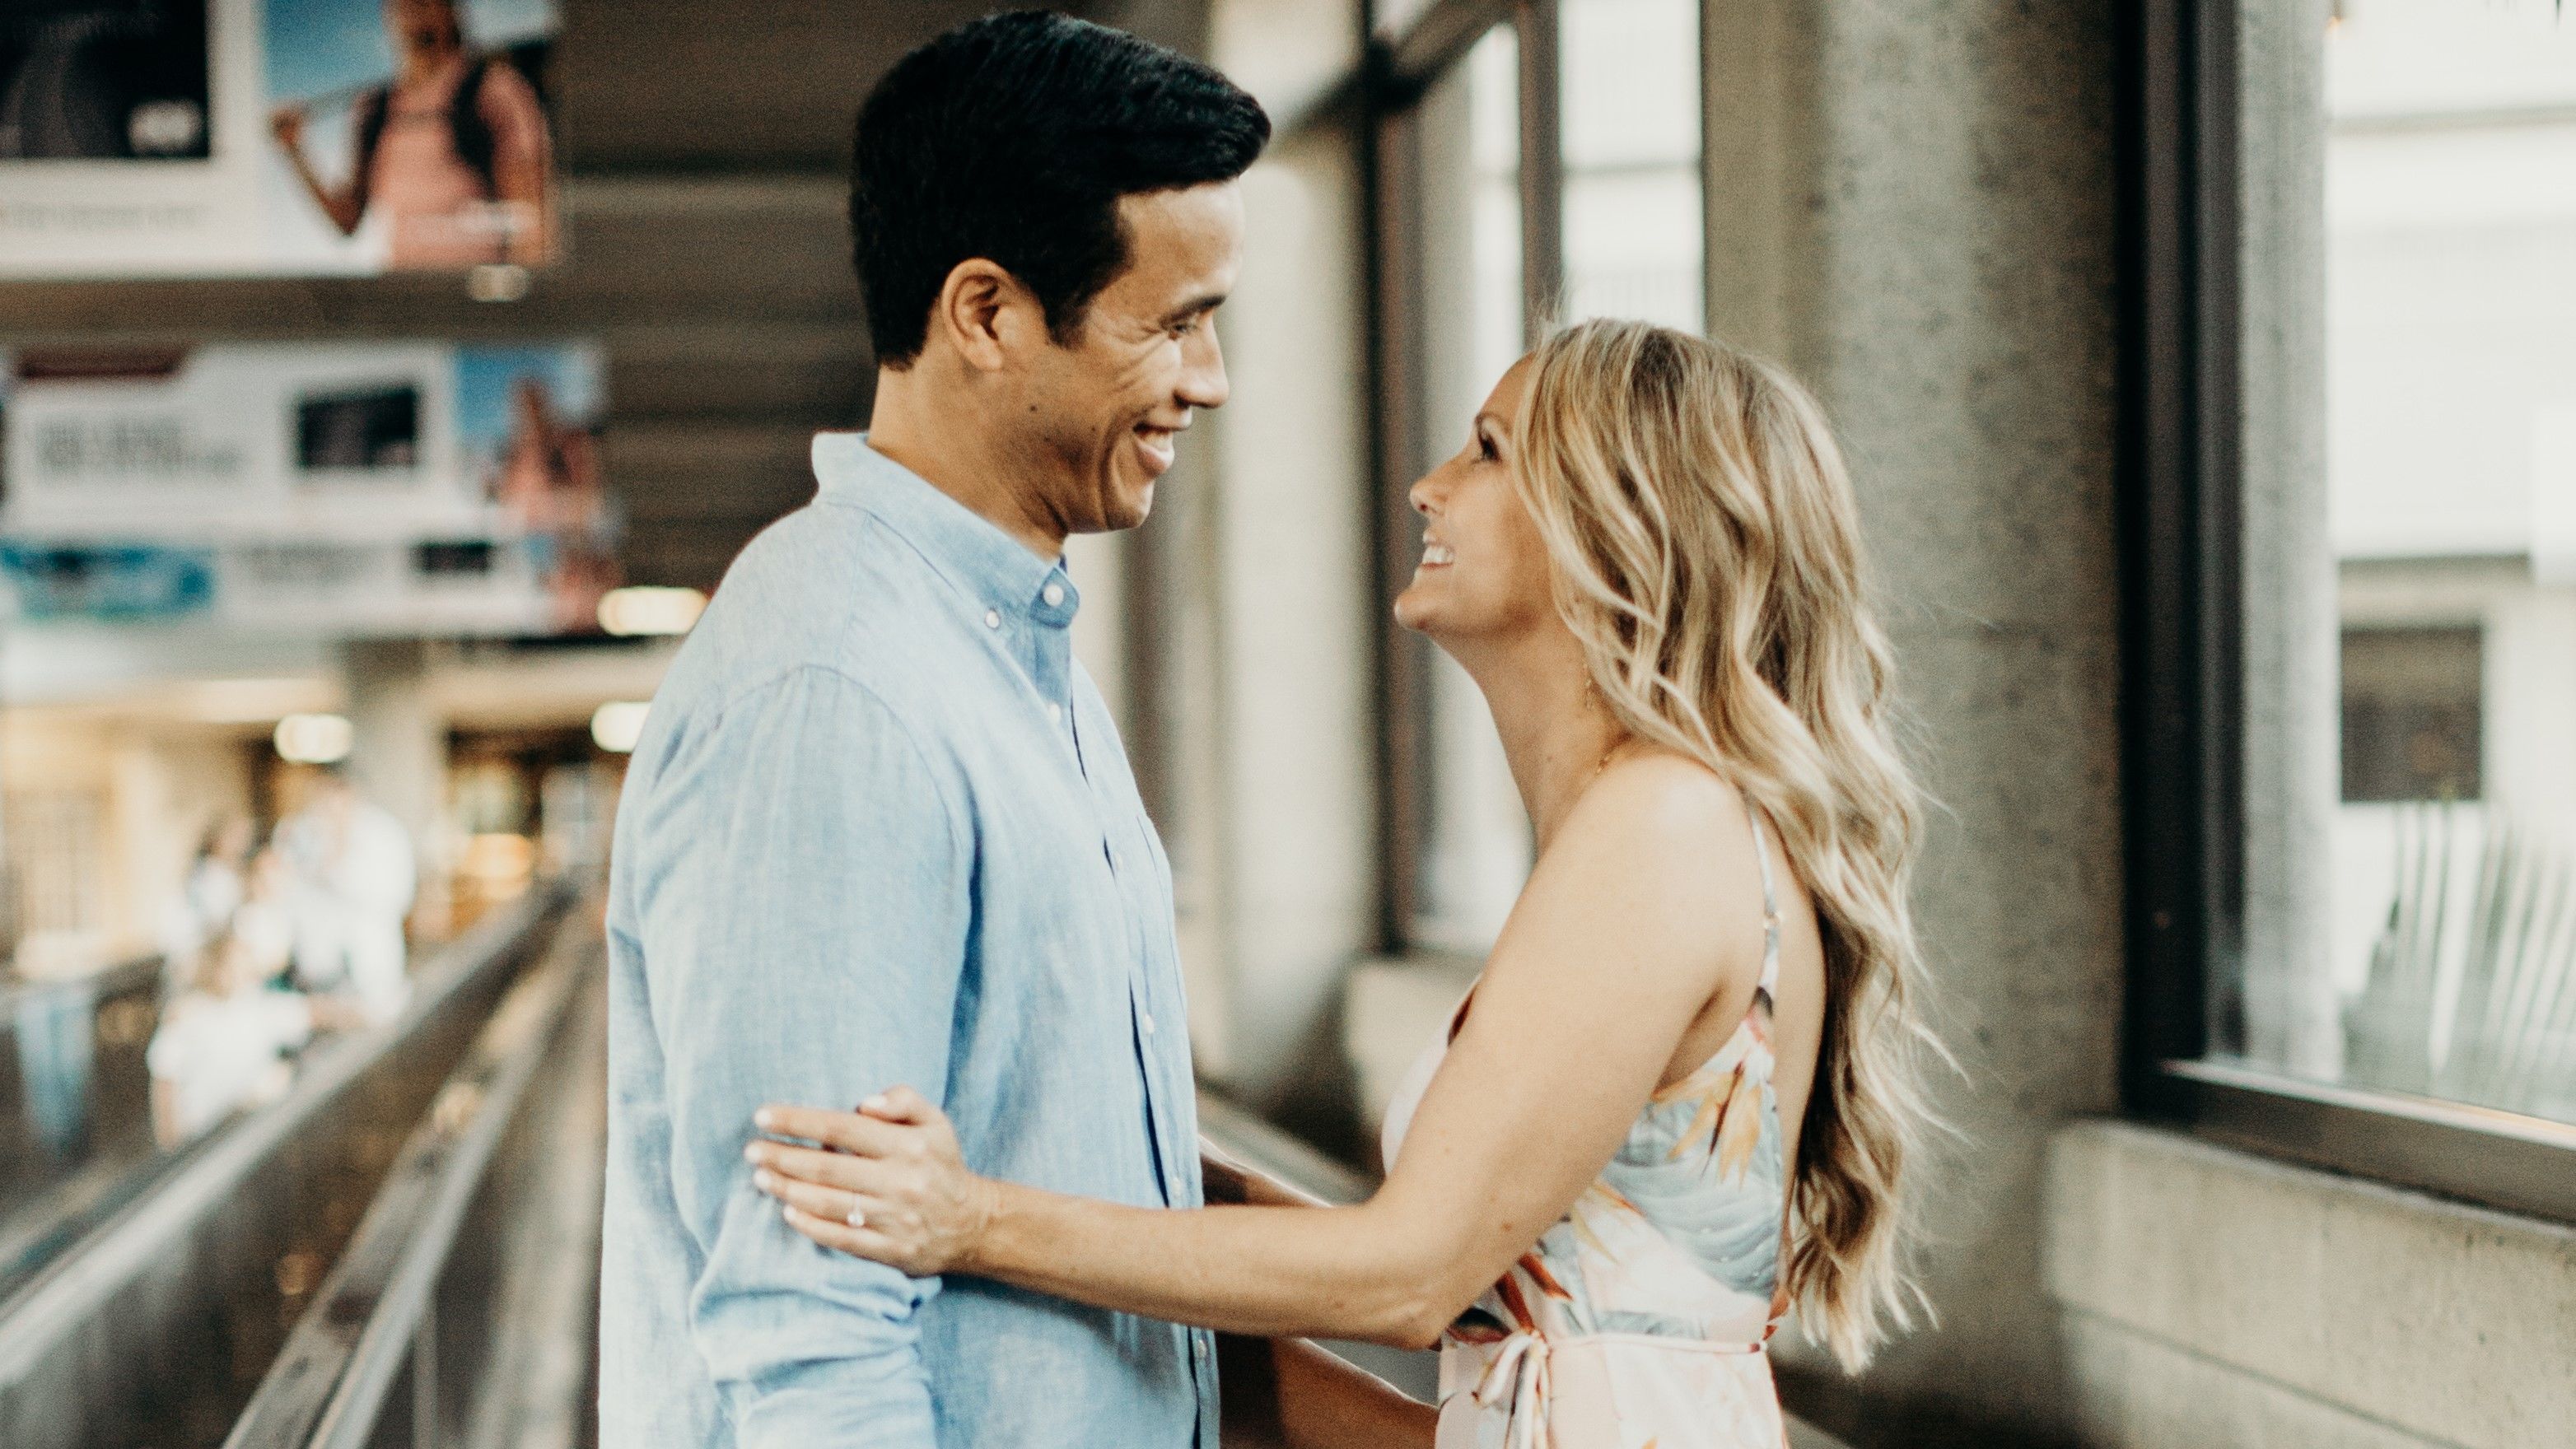 Christian Friese was trying to find her way at Honolulu Airport when Aaron Maluo stepped in and showed her the way to her gate. Christian and Aaron instantly connected, but assumed they'd never see each other again.